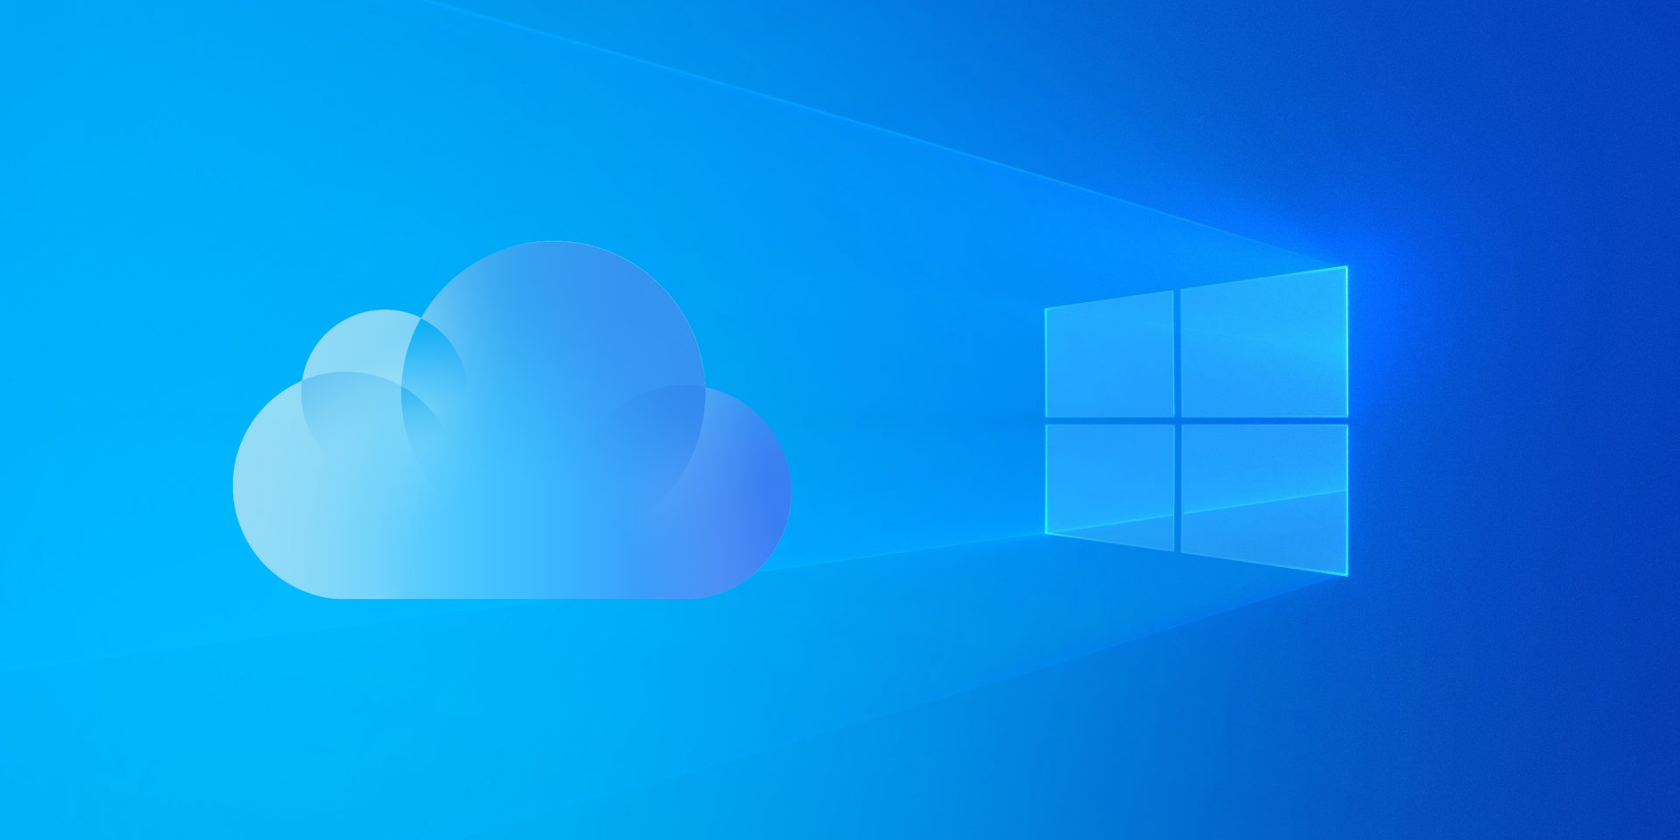 icloud for windows 10 download and install setup